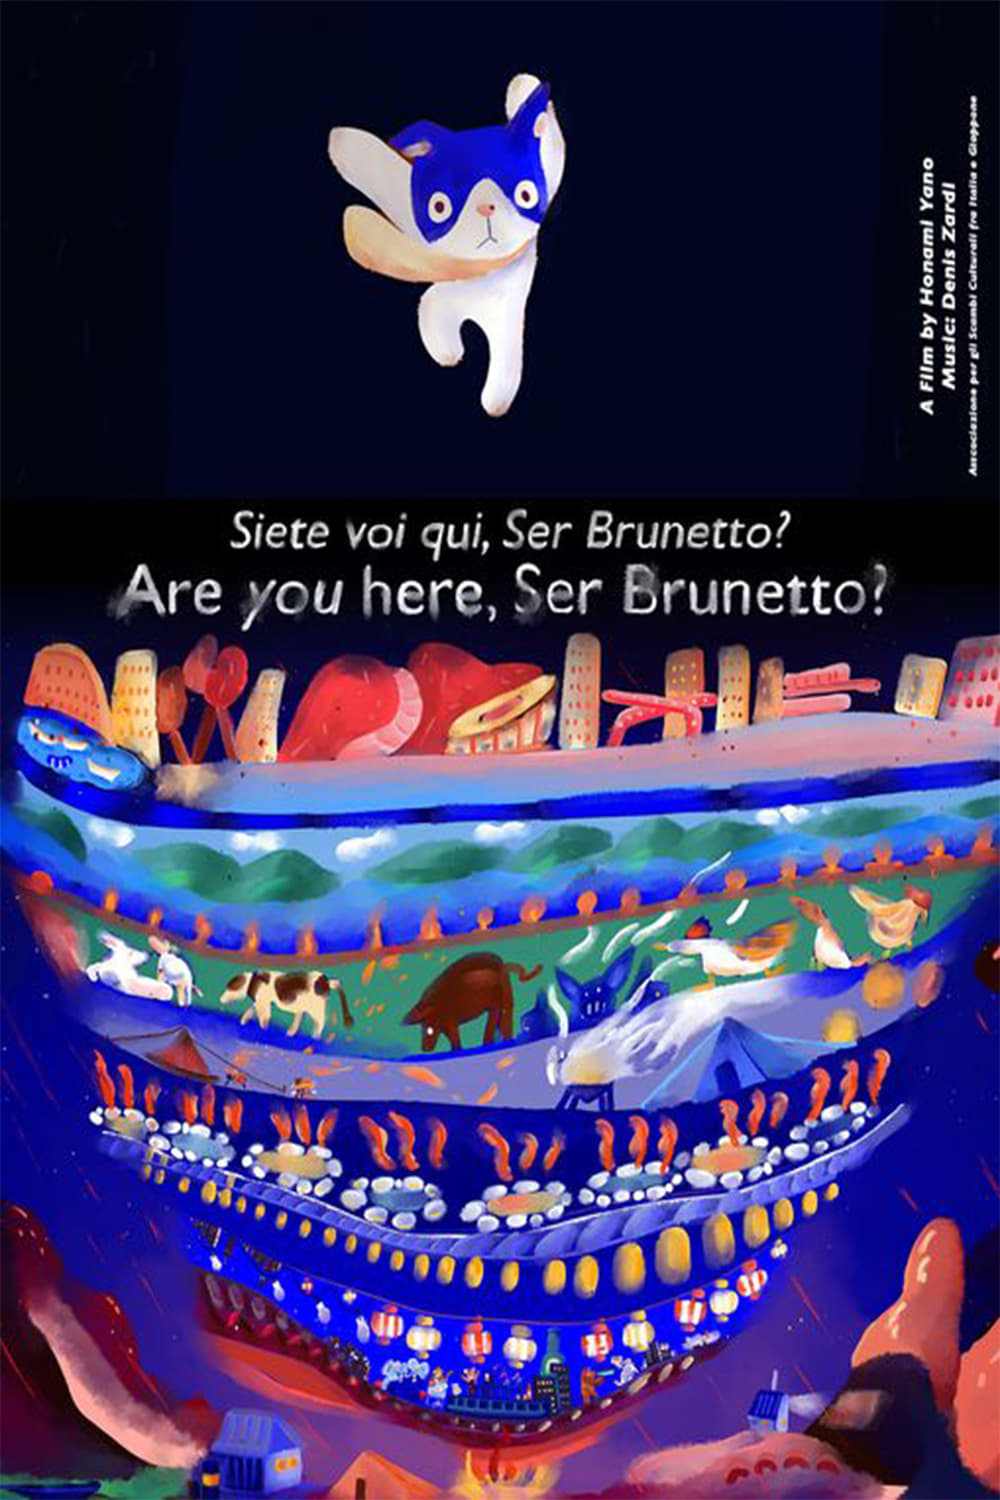 Are you here, Ser Brunetto?